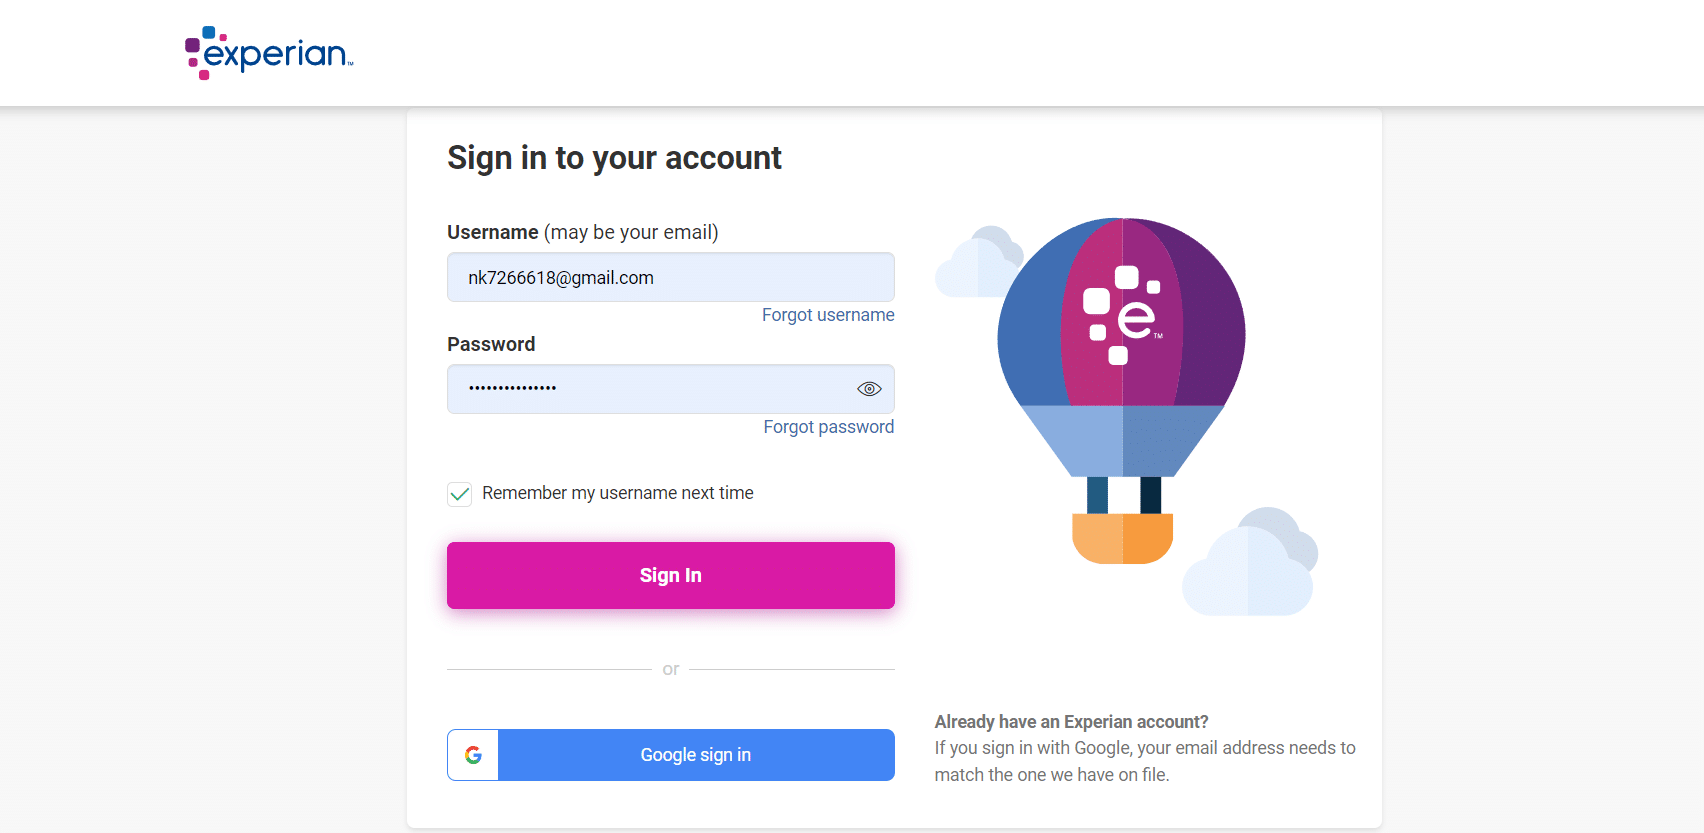 Sign in by entering your email address and password | delete Experian account